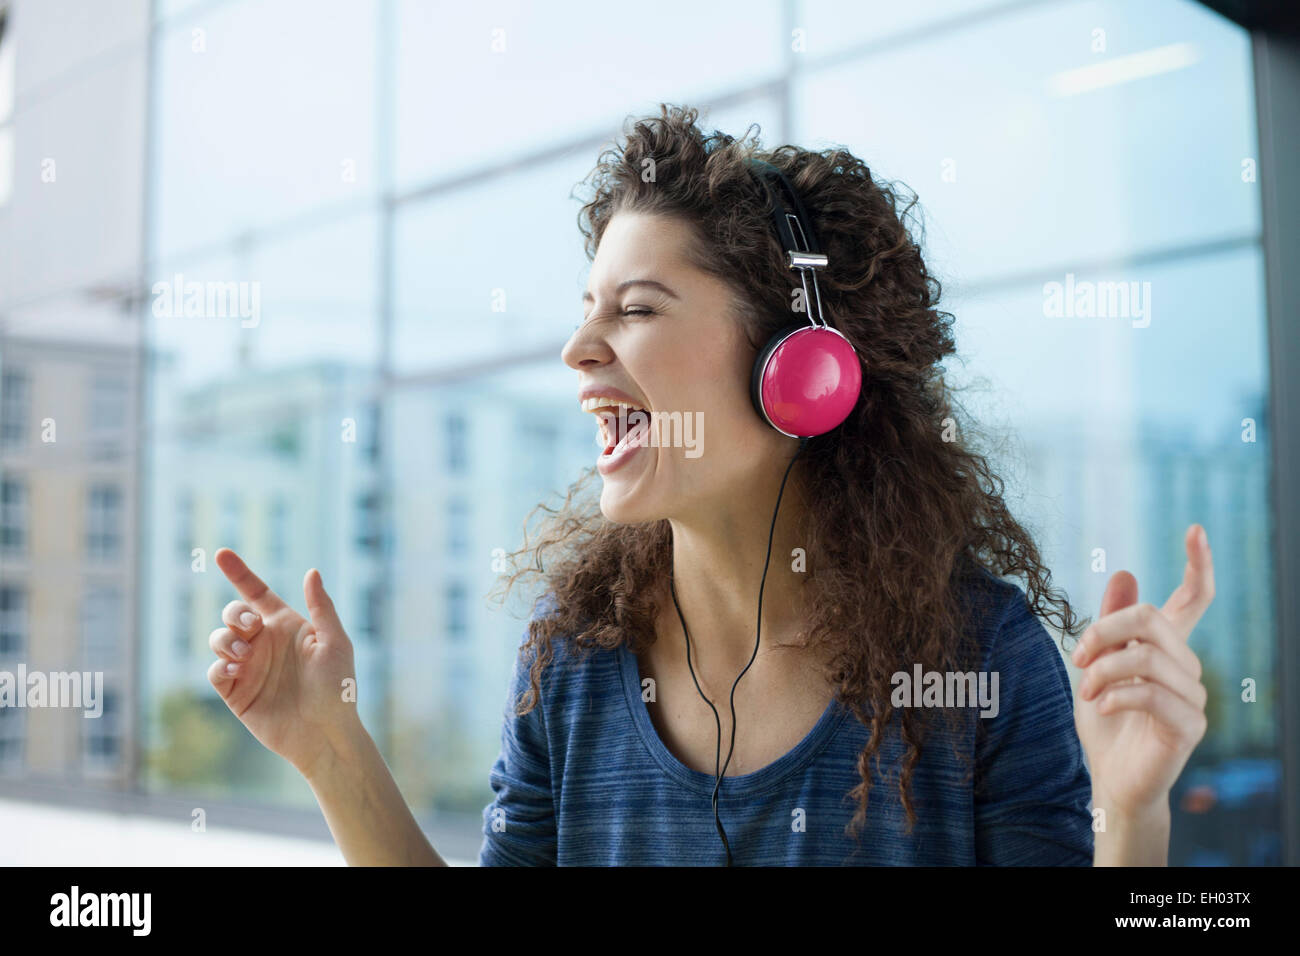 Screaming young woman wearing headphones at the window Stock Photo